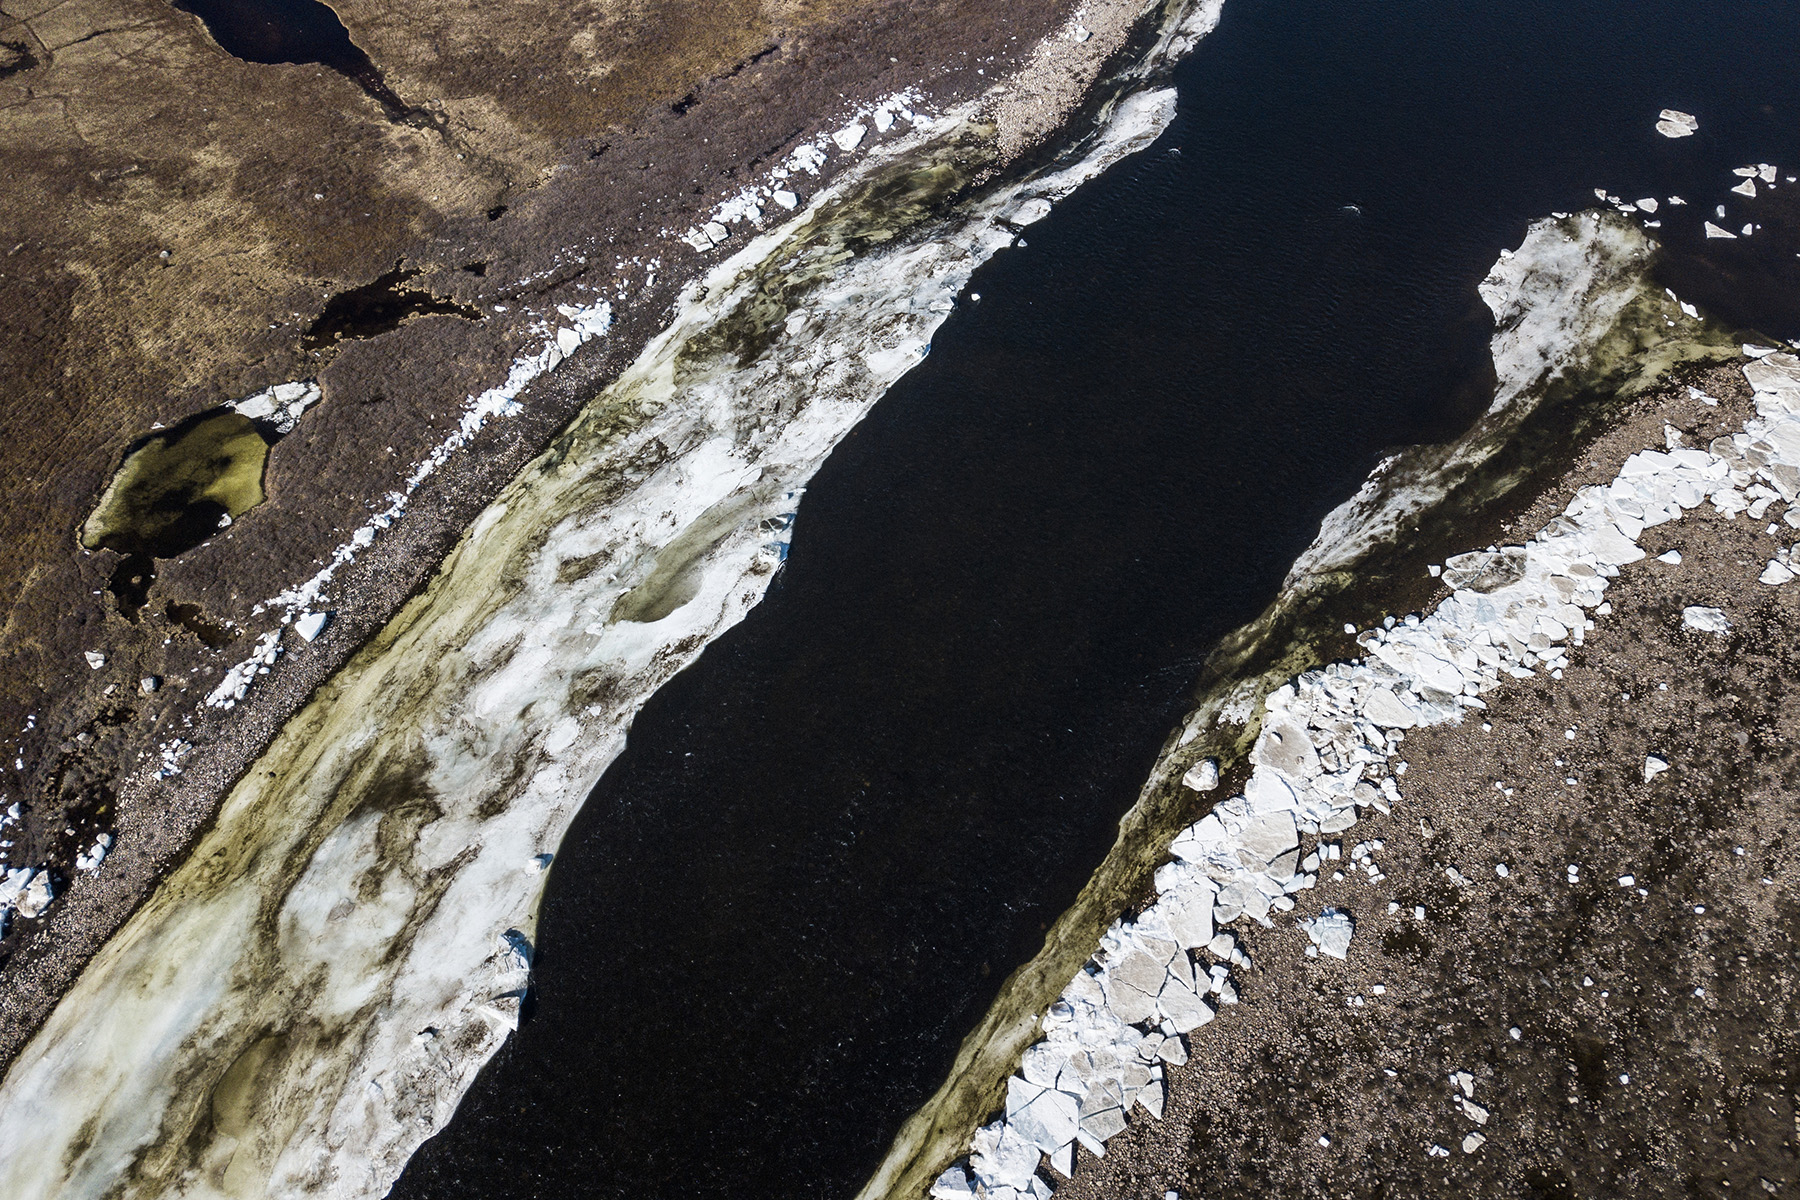  Canada, Nunavut, Kangiqsualuk Ilua (Hudson Bay), June 2018

Ice remains at a river mouth close to Rankin Inlet at the Hudson Bay.
The Canadian Arctic is immense and remote. There are no deep sea ports, hardly any roads and Canada has too few icebrea